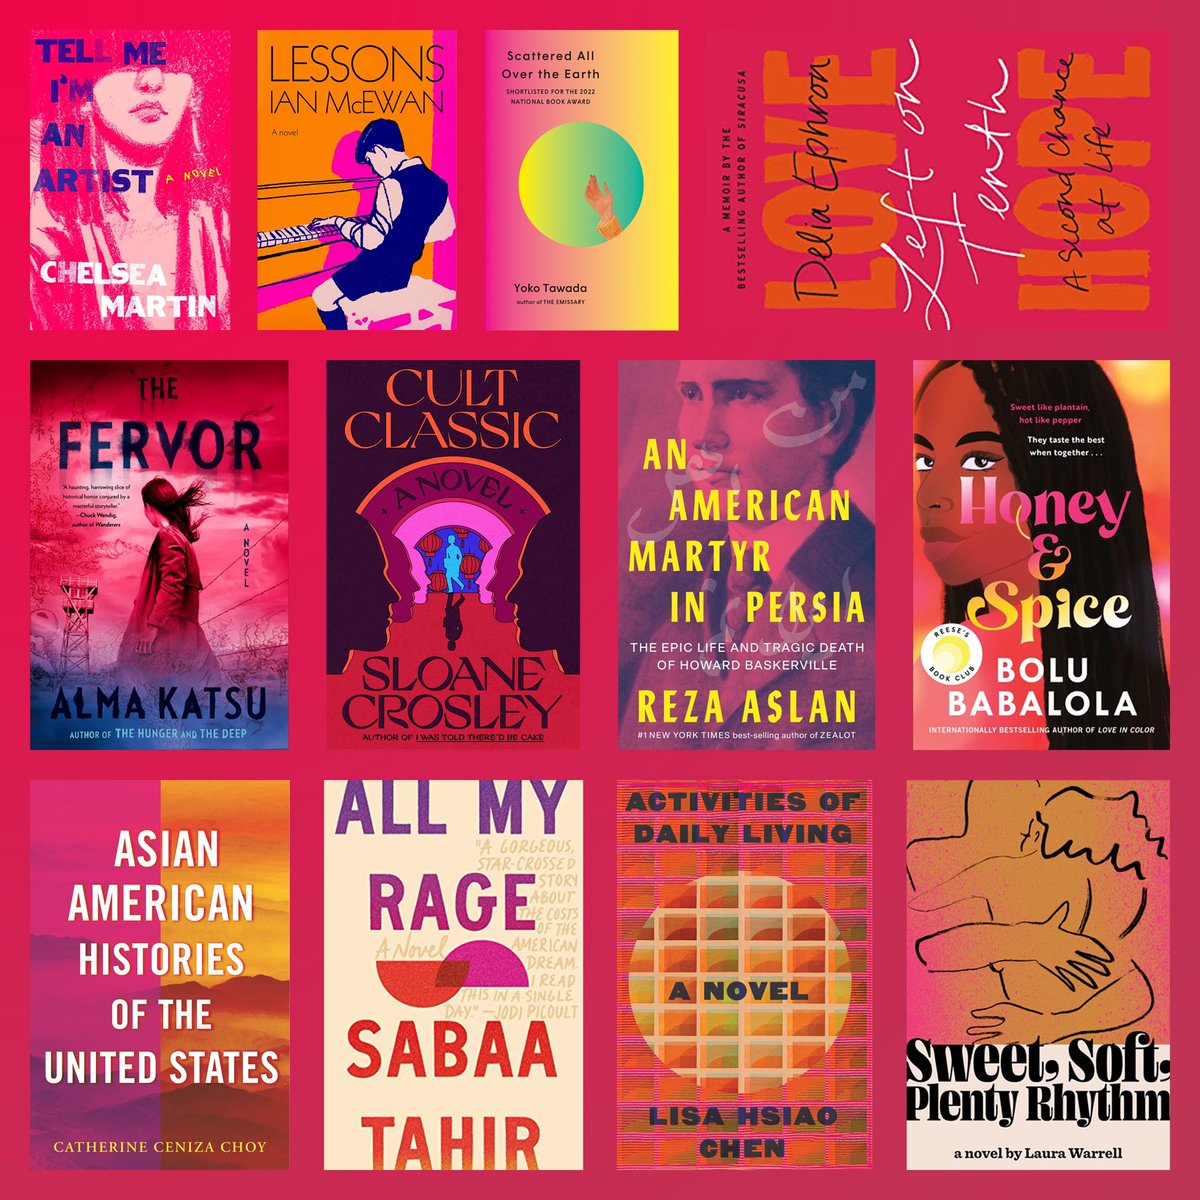 and with no further ado... 🥁💥 it's the 2023 Pantone Color of the year in 2022 book covers! In unrelated news, apparently I have no idea what magenta is.